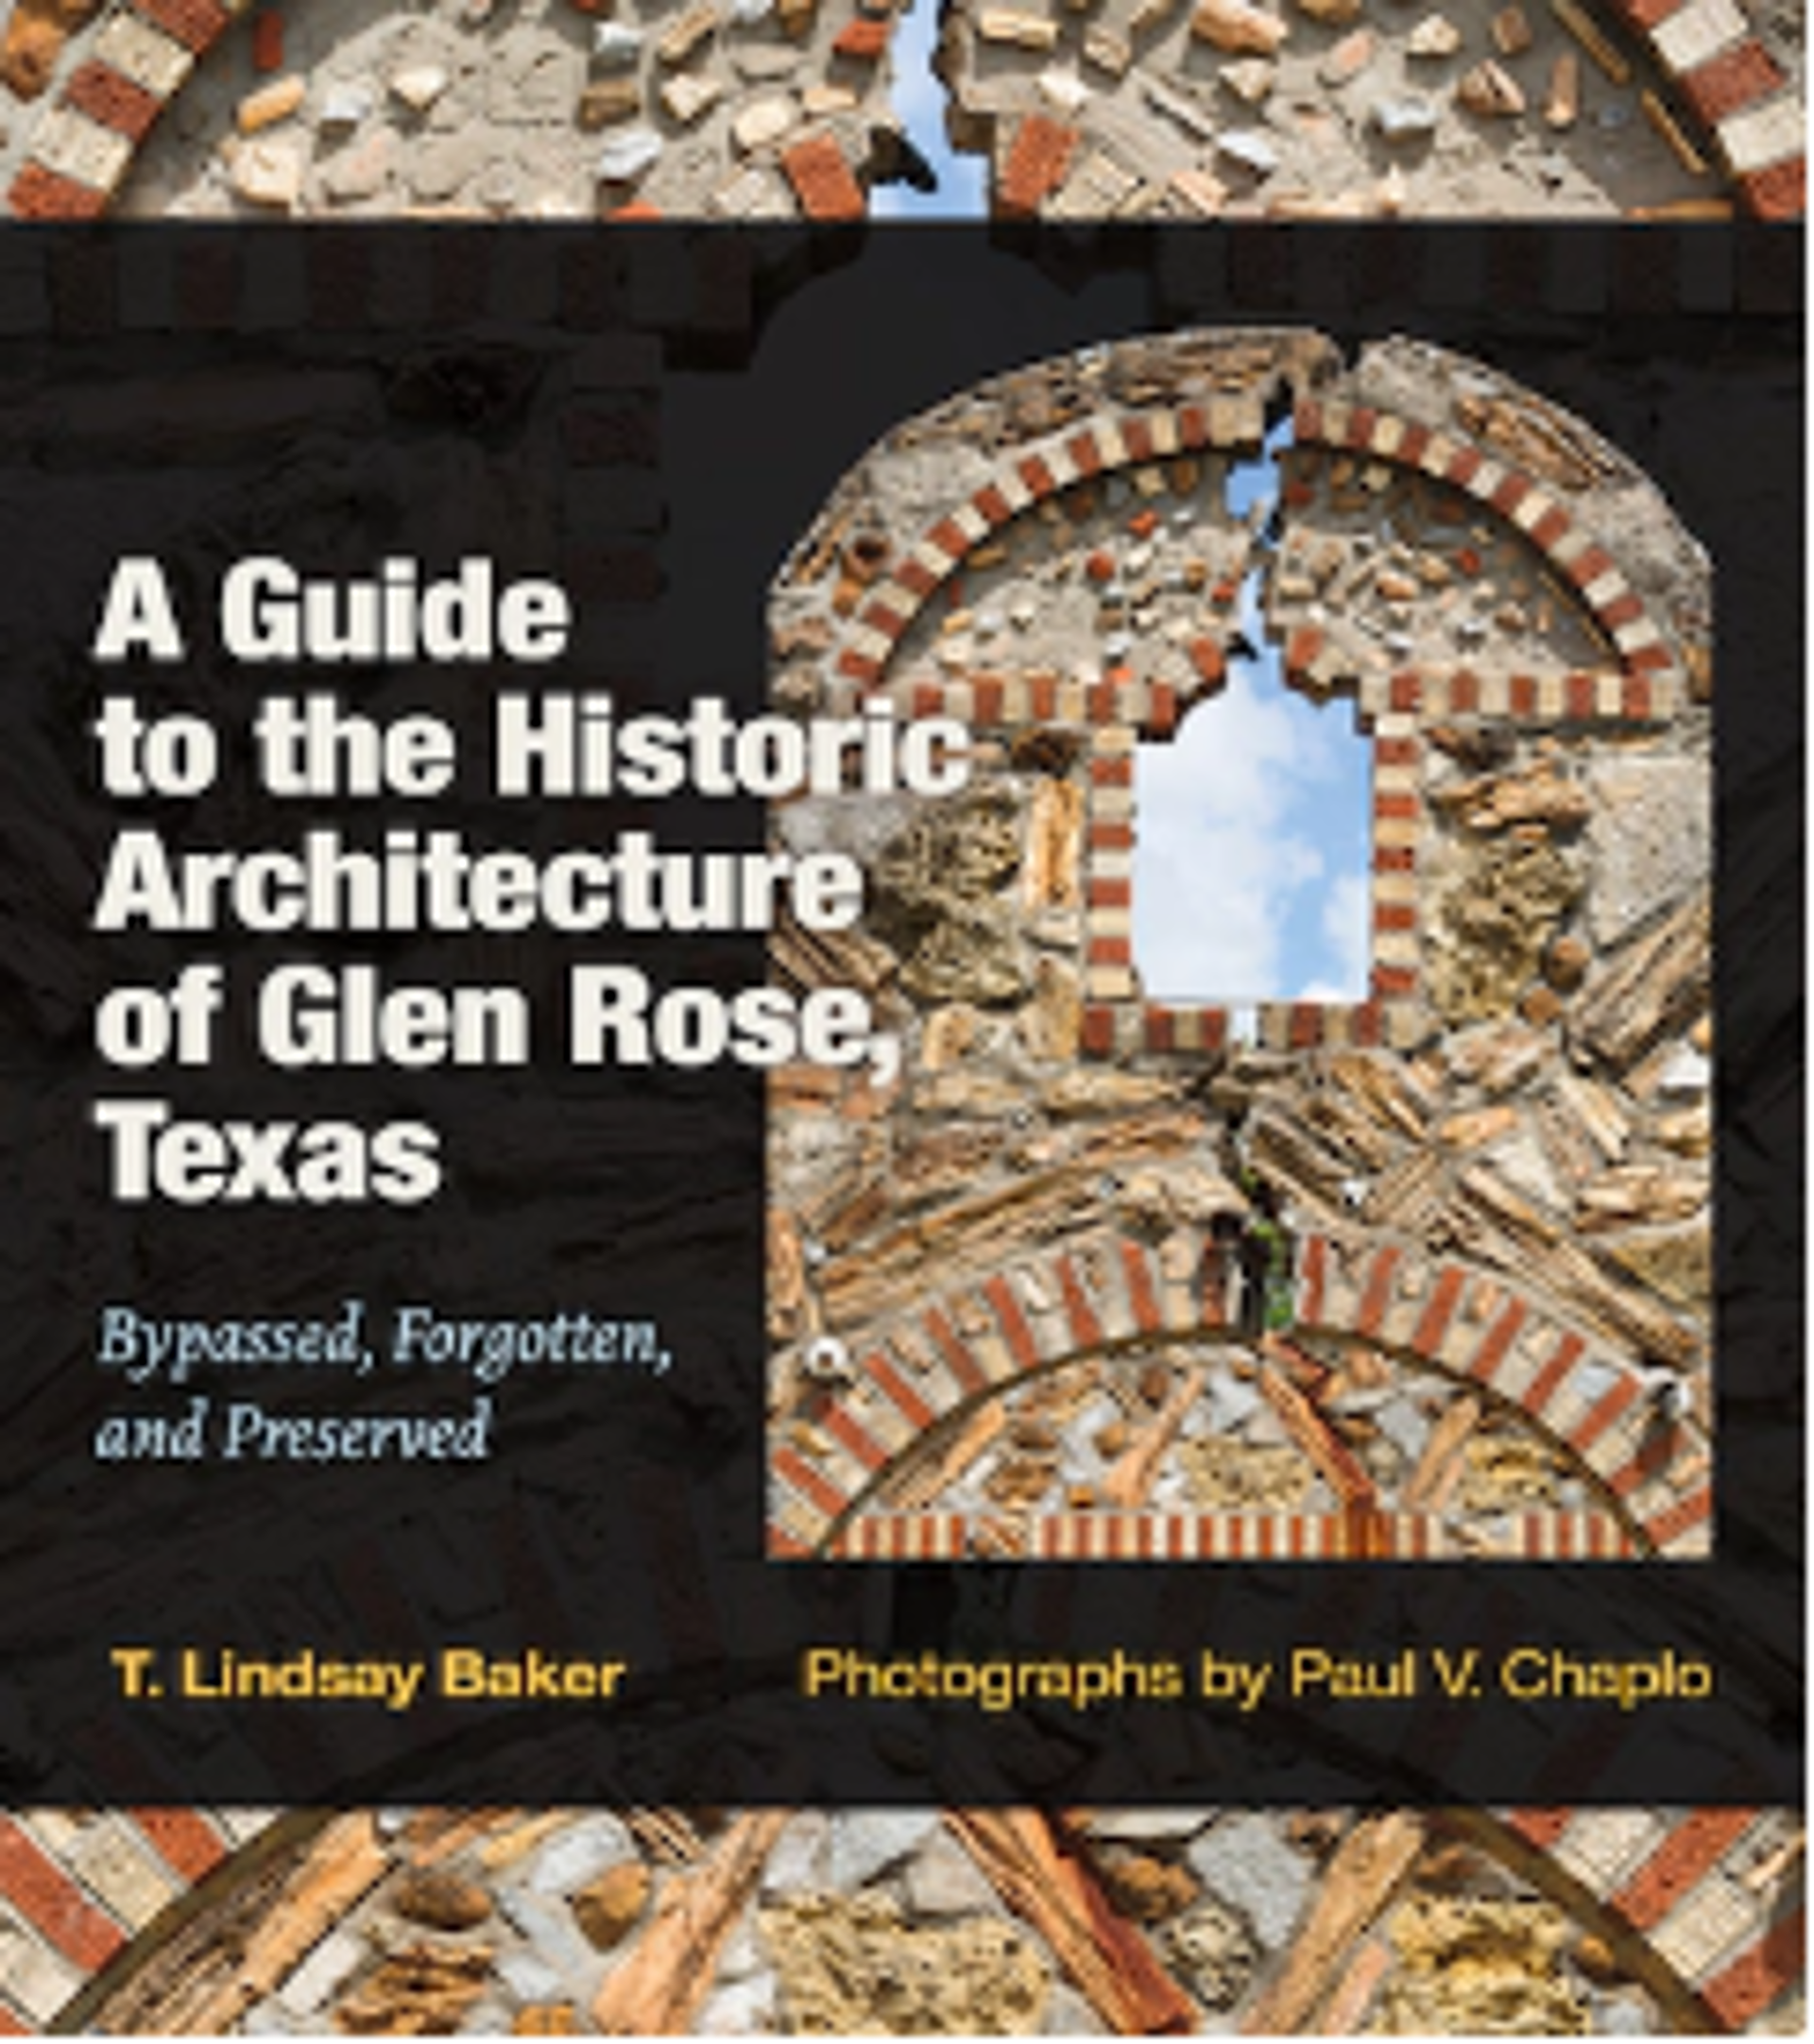 A Guide to the Historic Architecture of Glen Rose: Bypassed, Forgotten, and Preserved, Texas by T. Lindsay Baker and Paul V. Chaplo by Publications